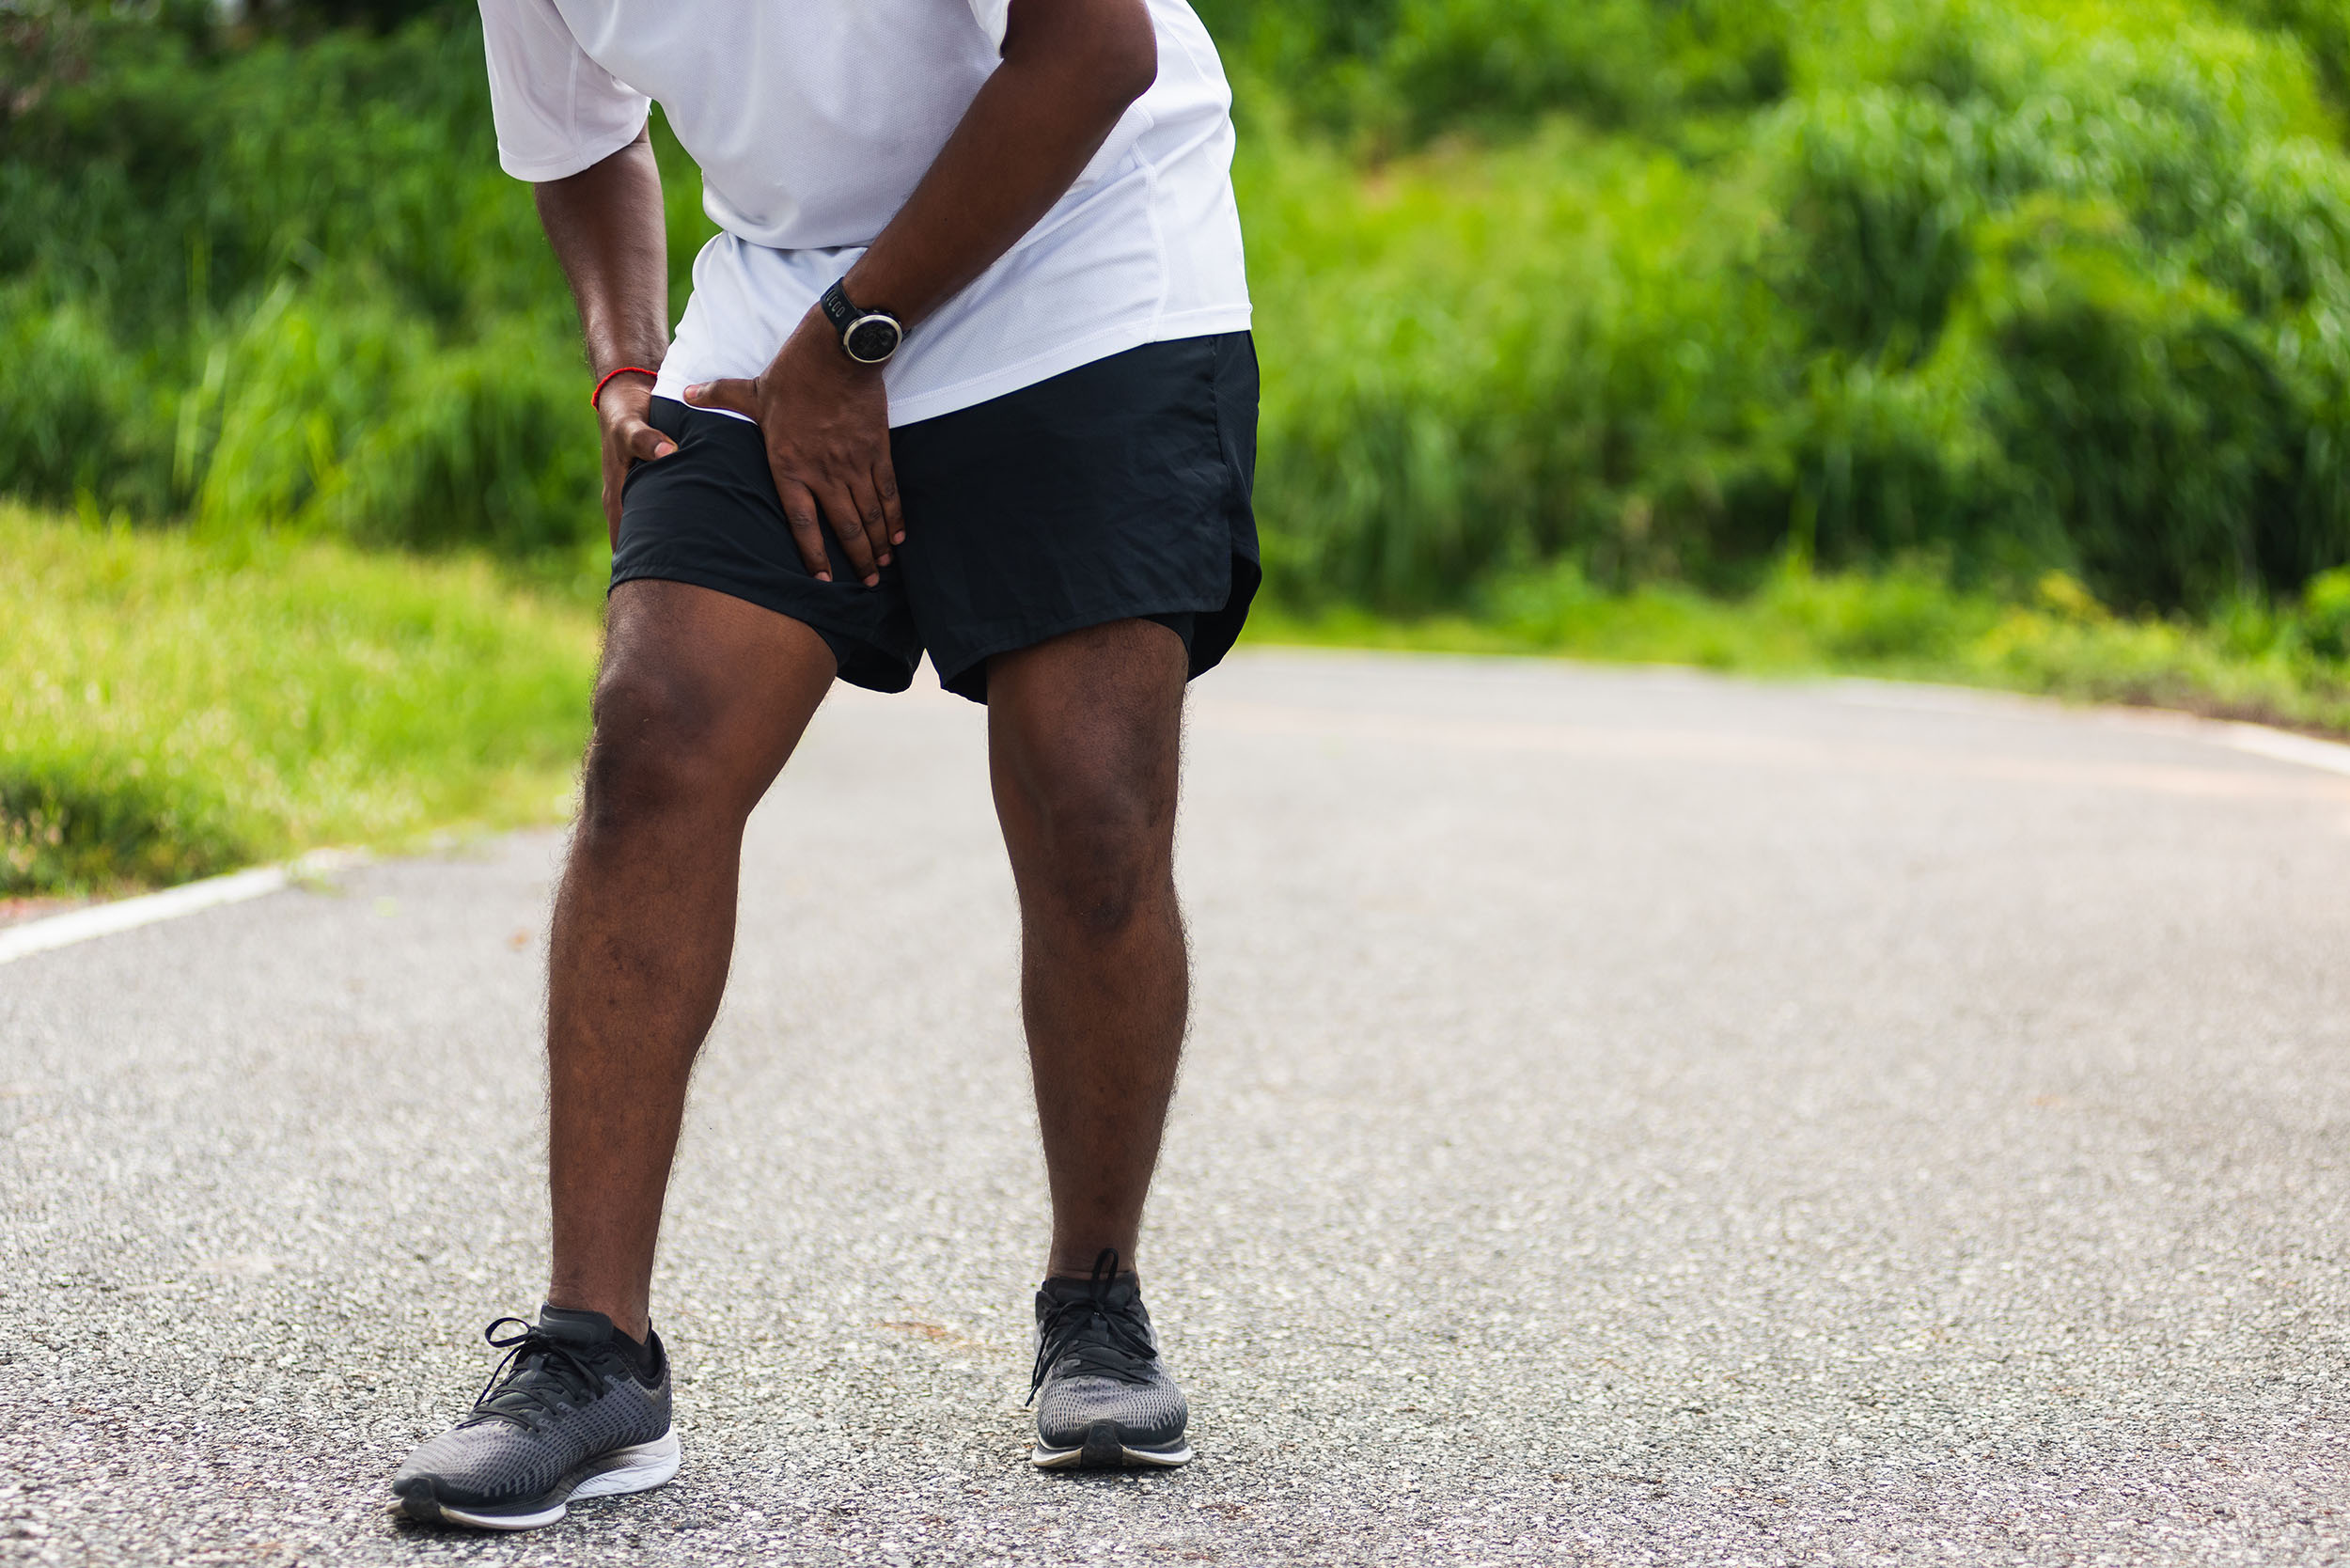 How Men Can Prevent Chafing